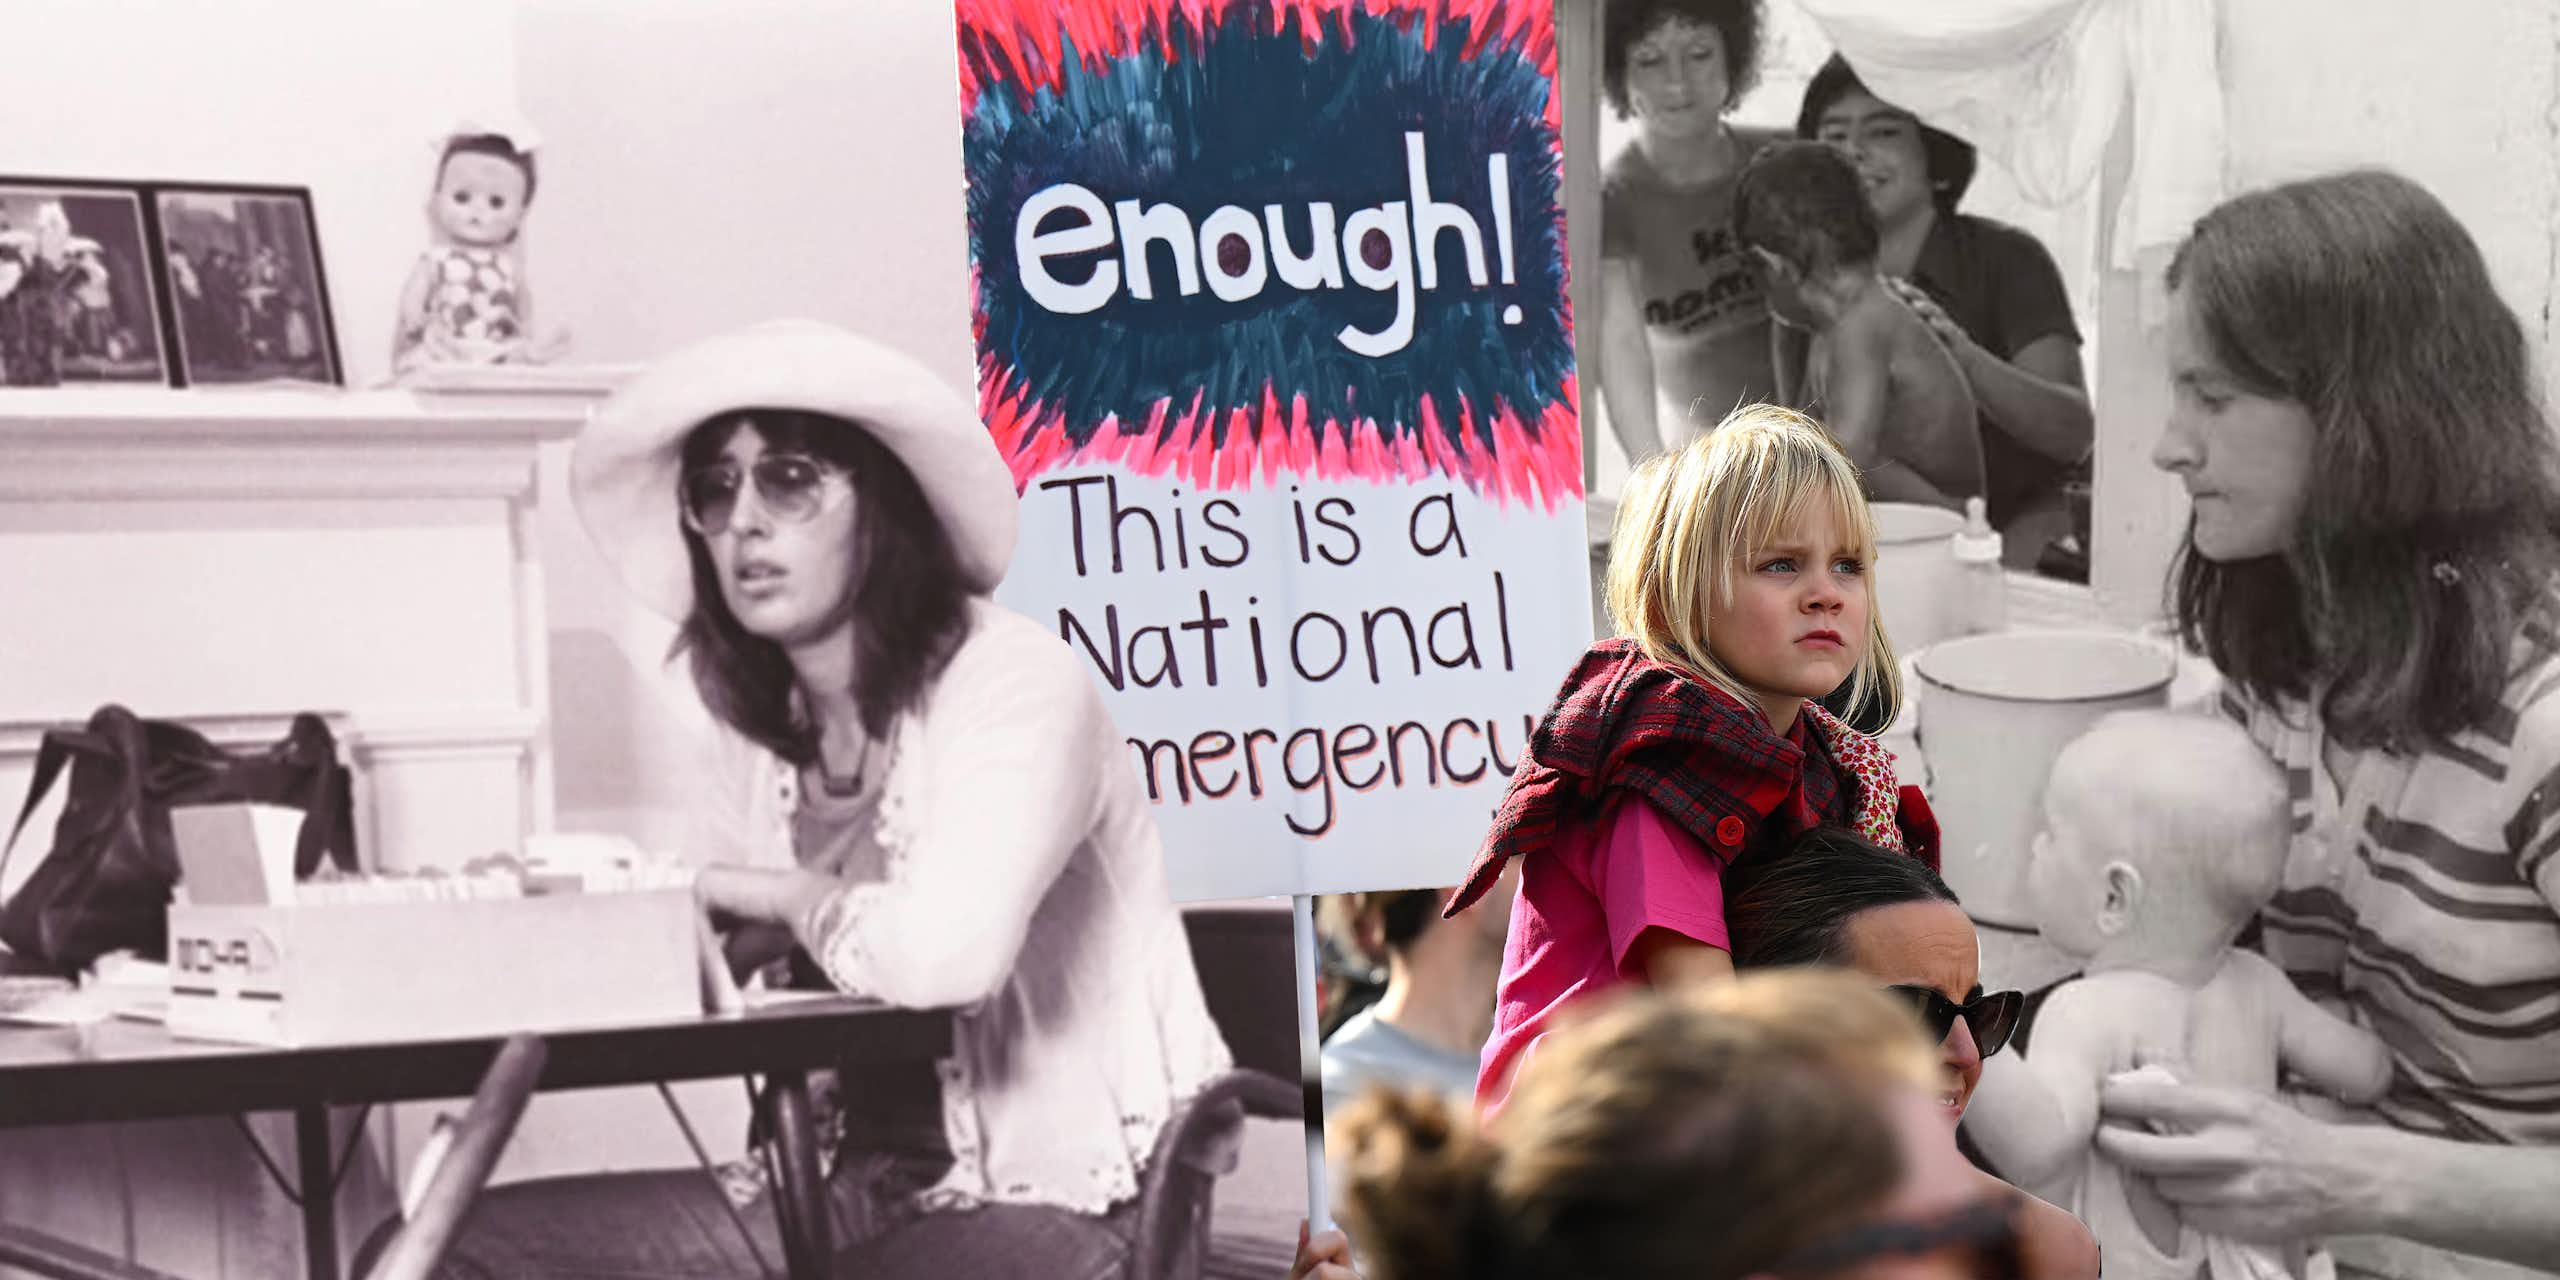 A black and white photo of Anne Summers at Elsie house for women, with a modern image of a young girl at a rally with a sign saying 'Enough! This is a National Emergency'.